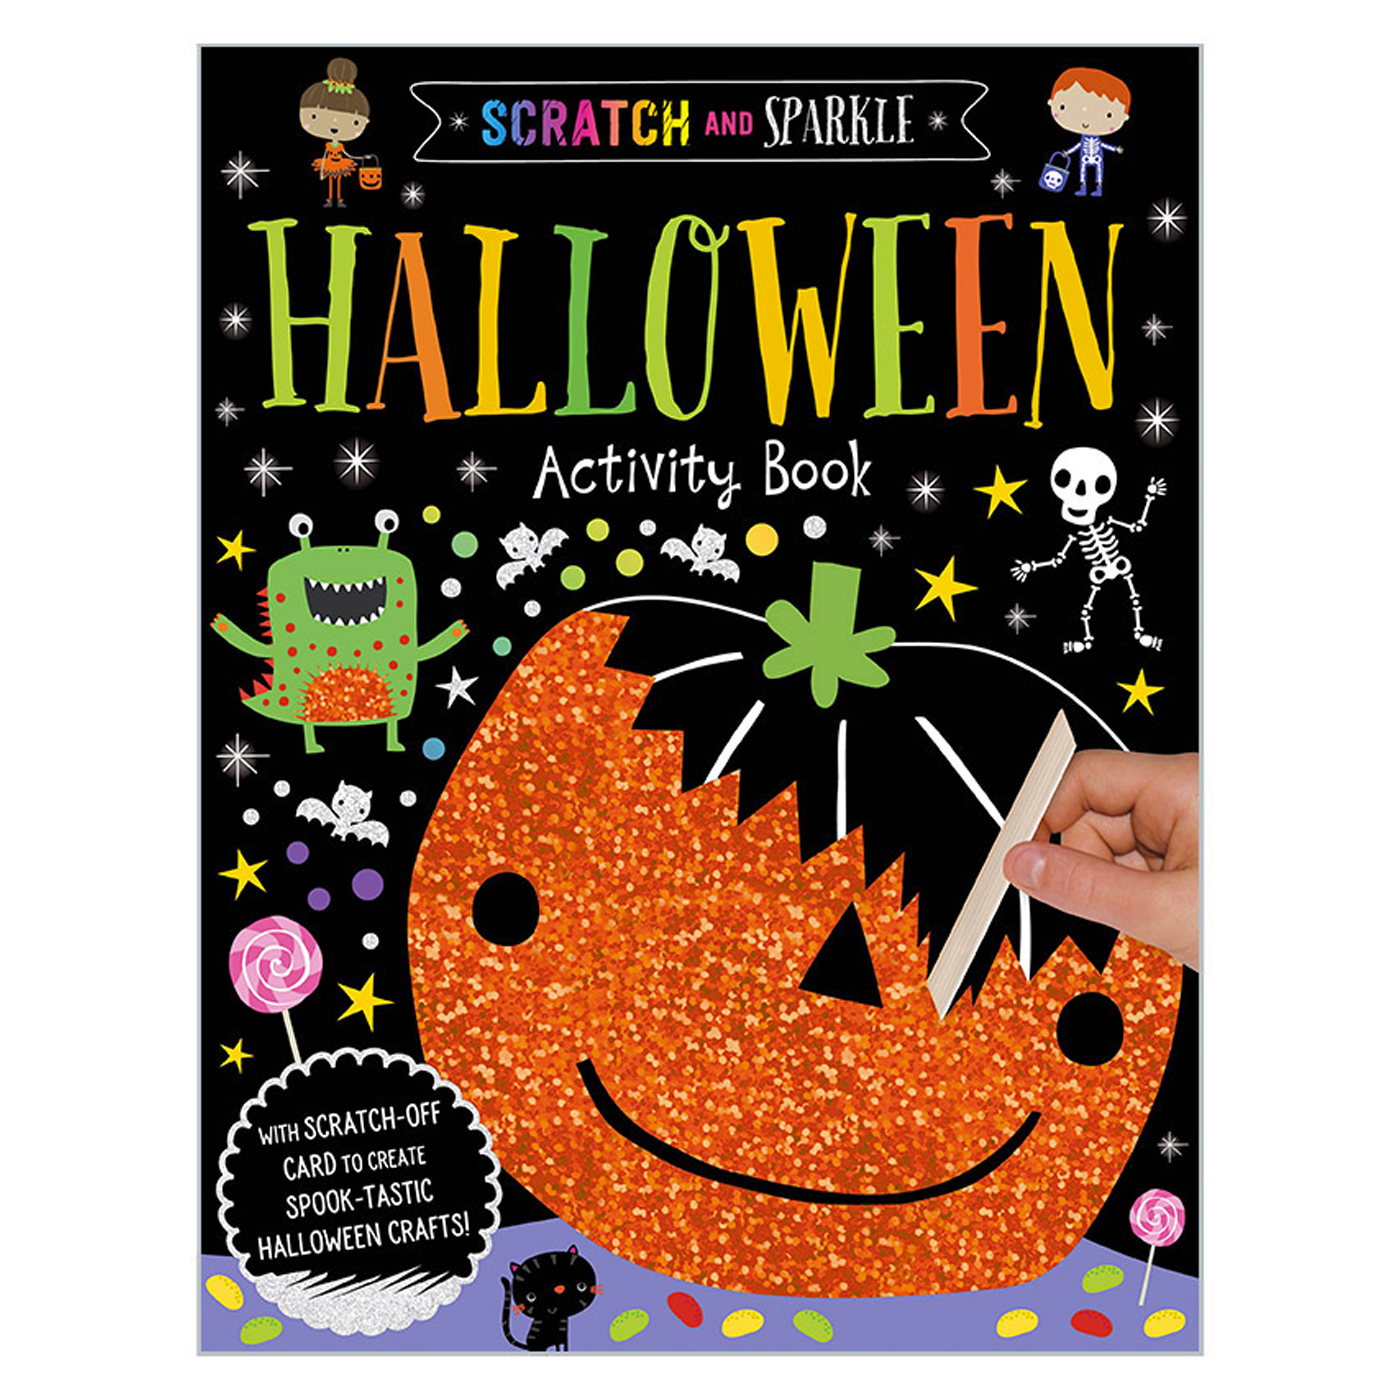  Scratch and Sparkle Halloween Activity Book